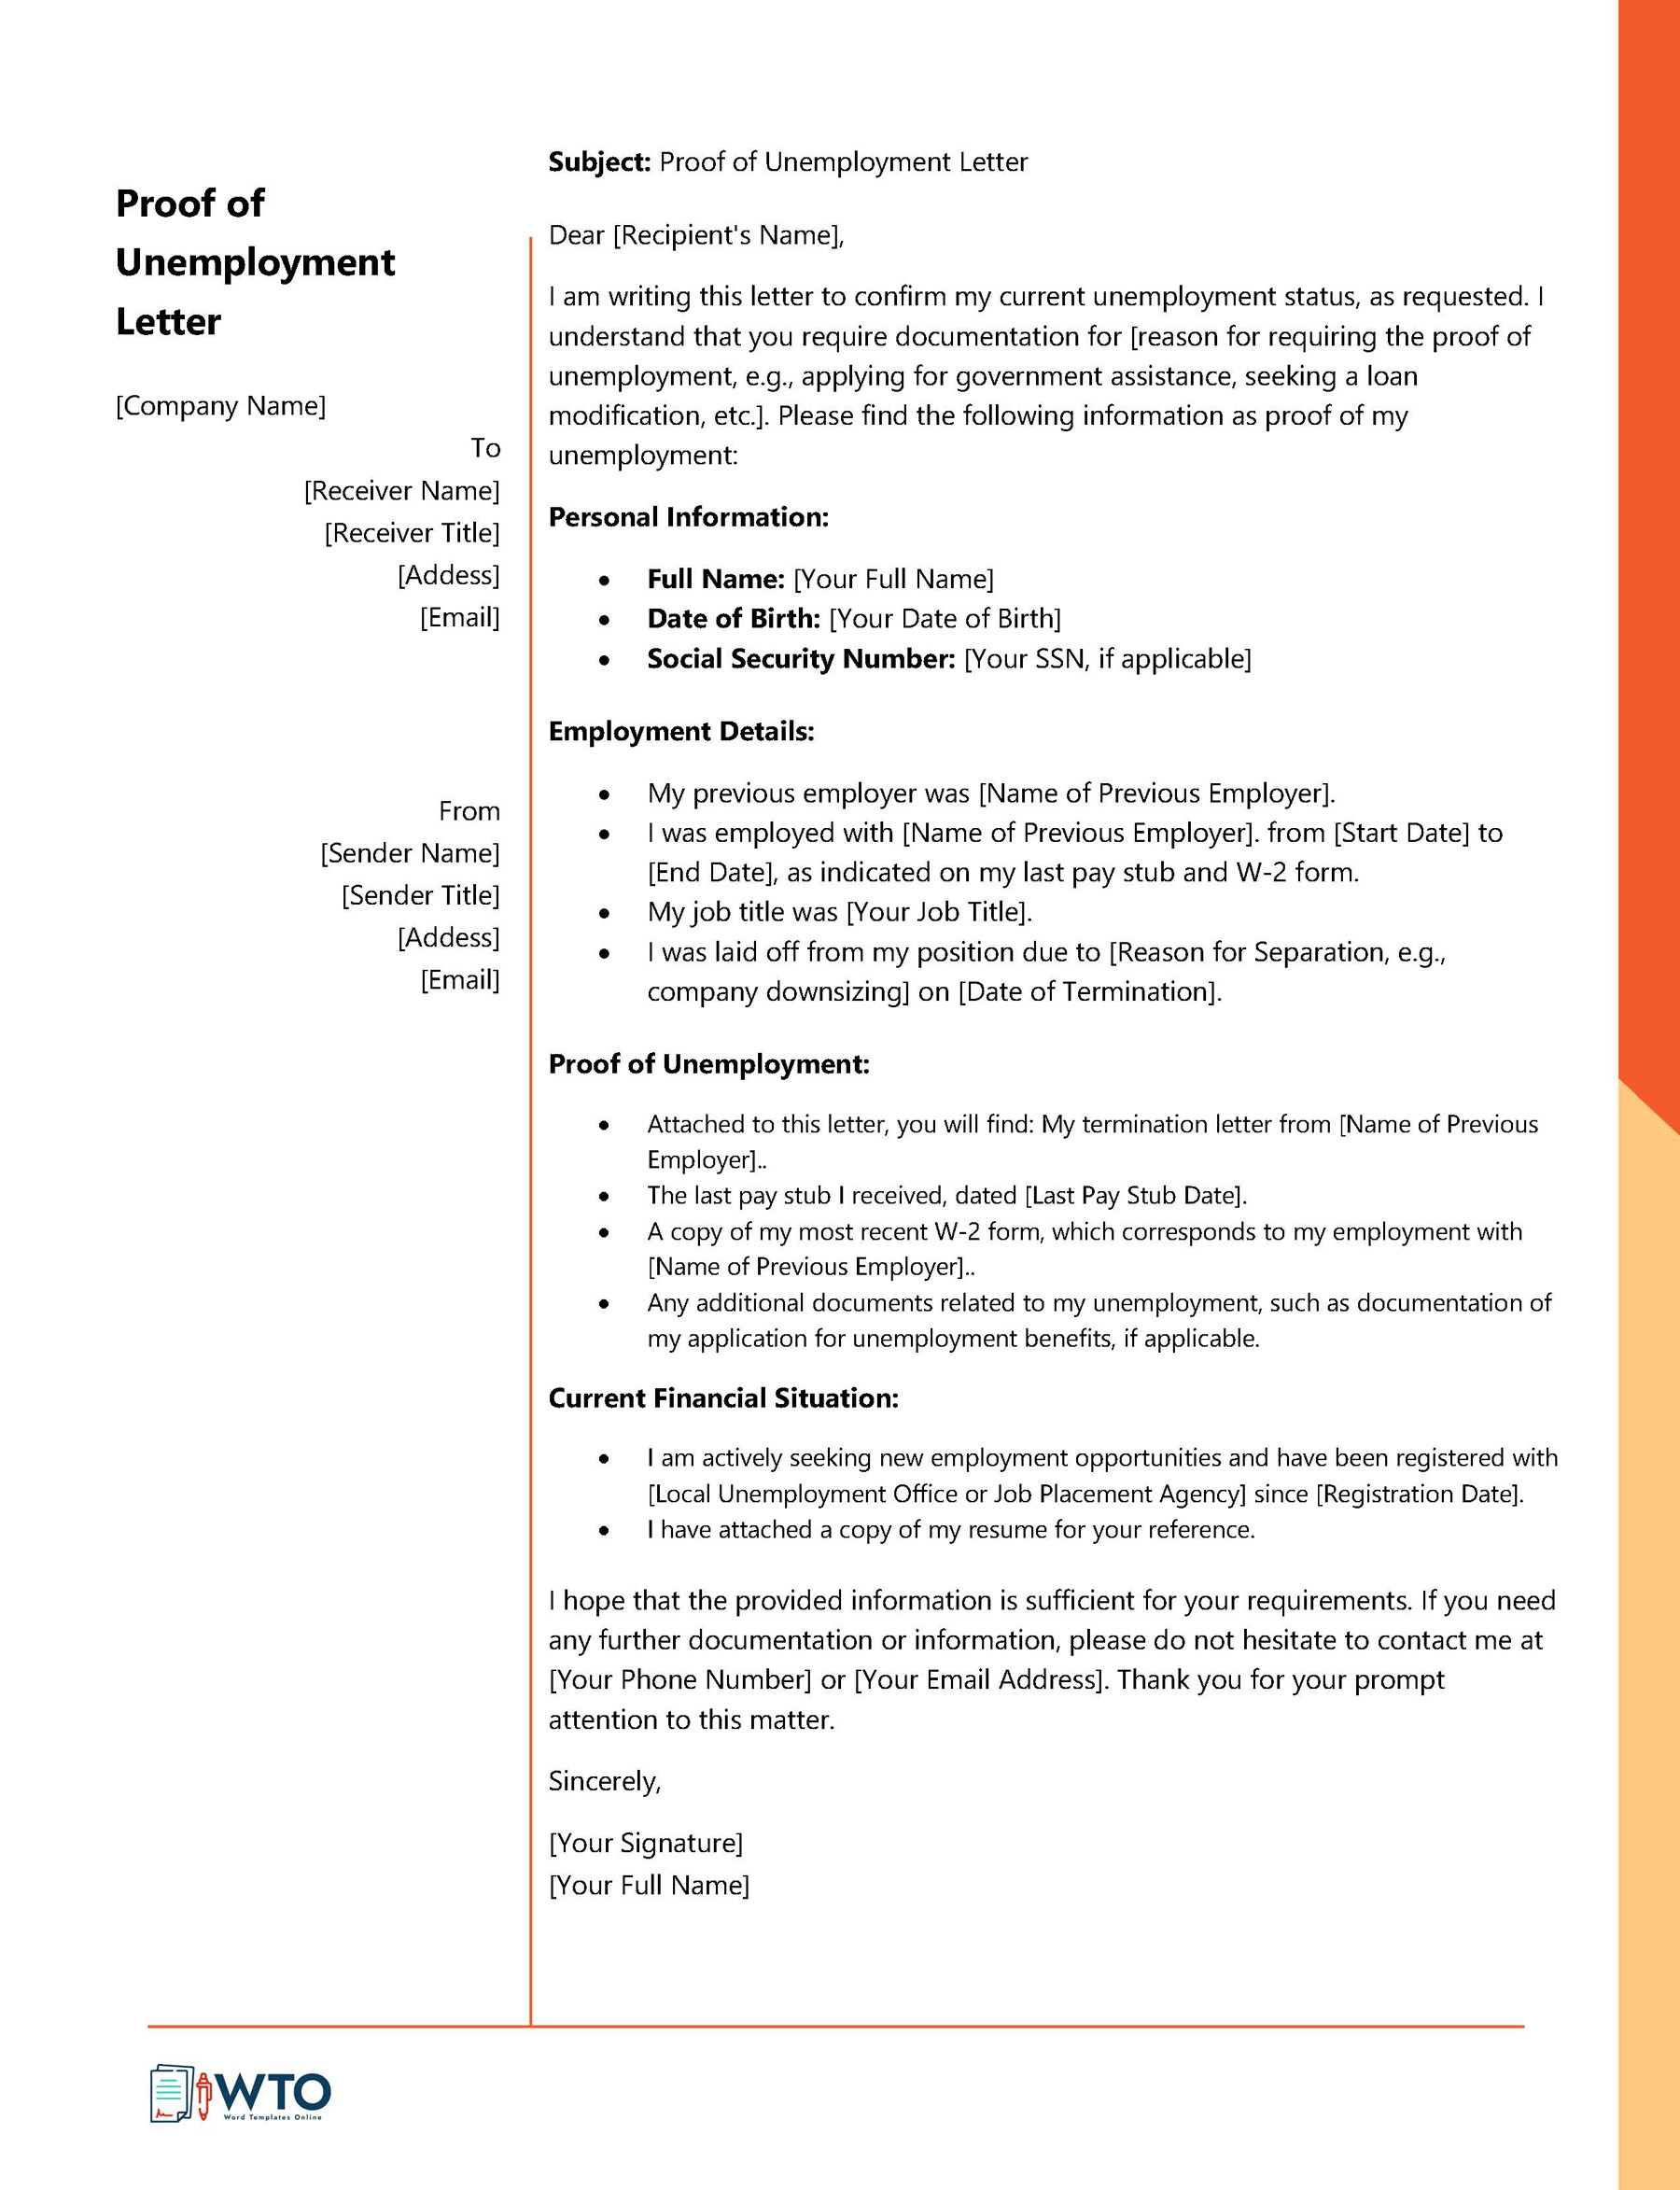 Proof of Unemployment Letter - Formal Proof Document